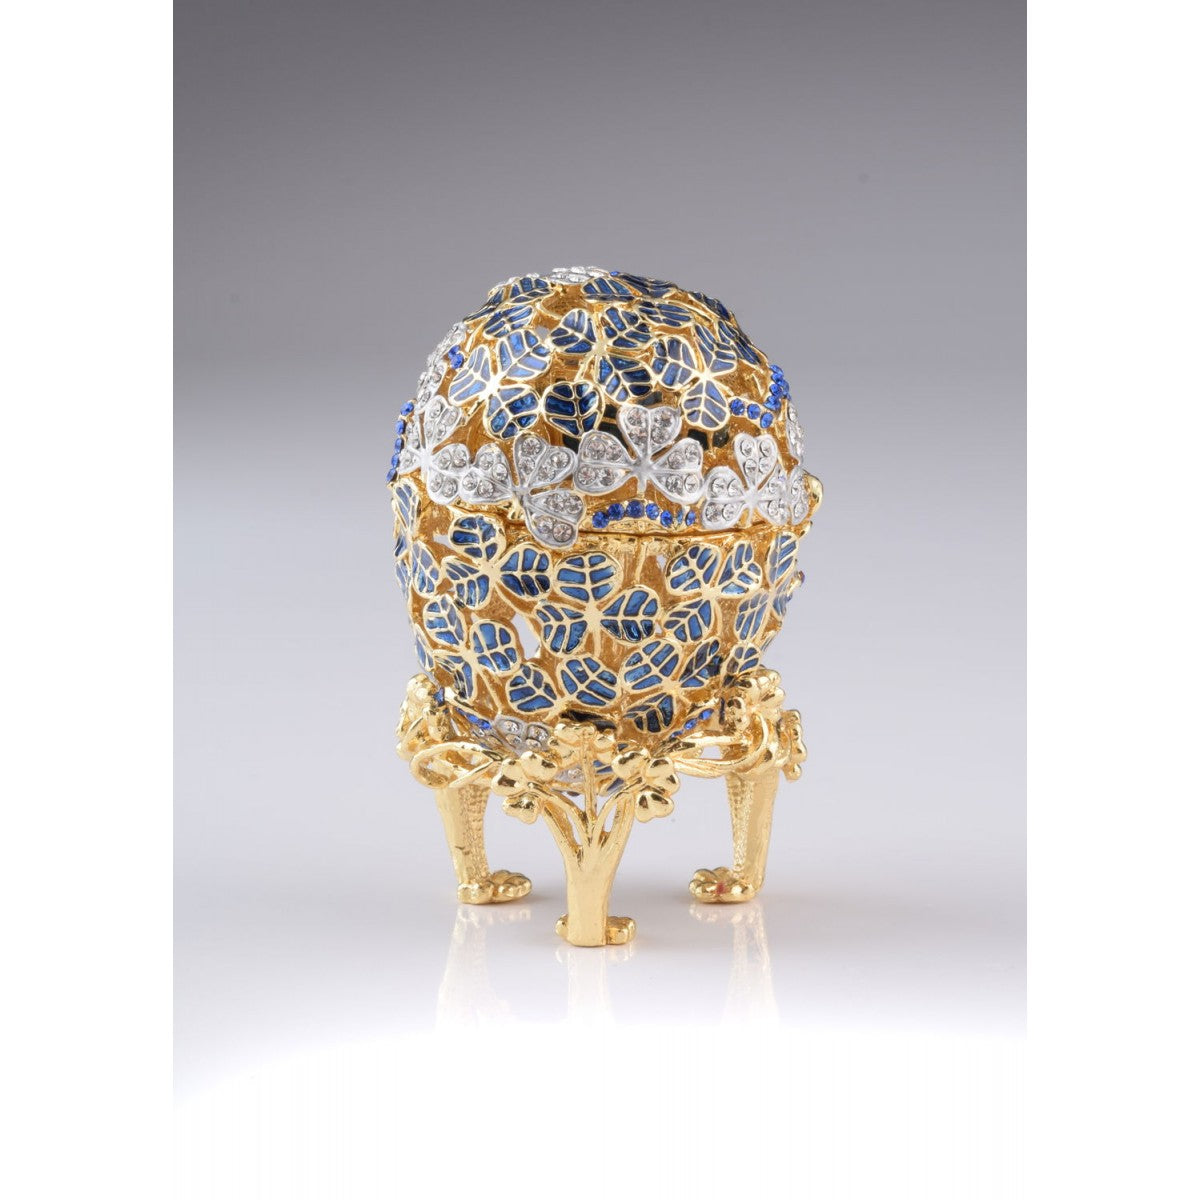 Blue Faberge Egg with Car Inside